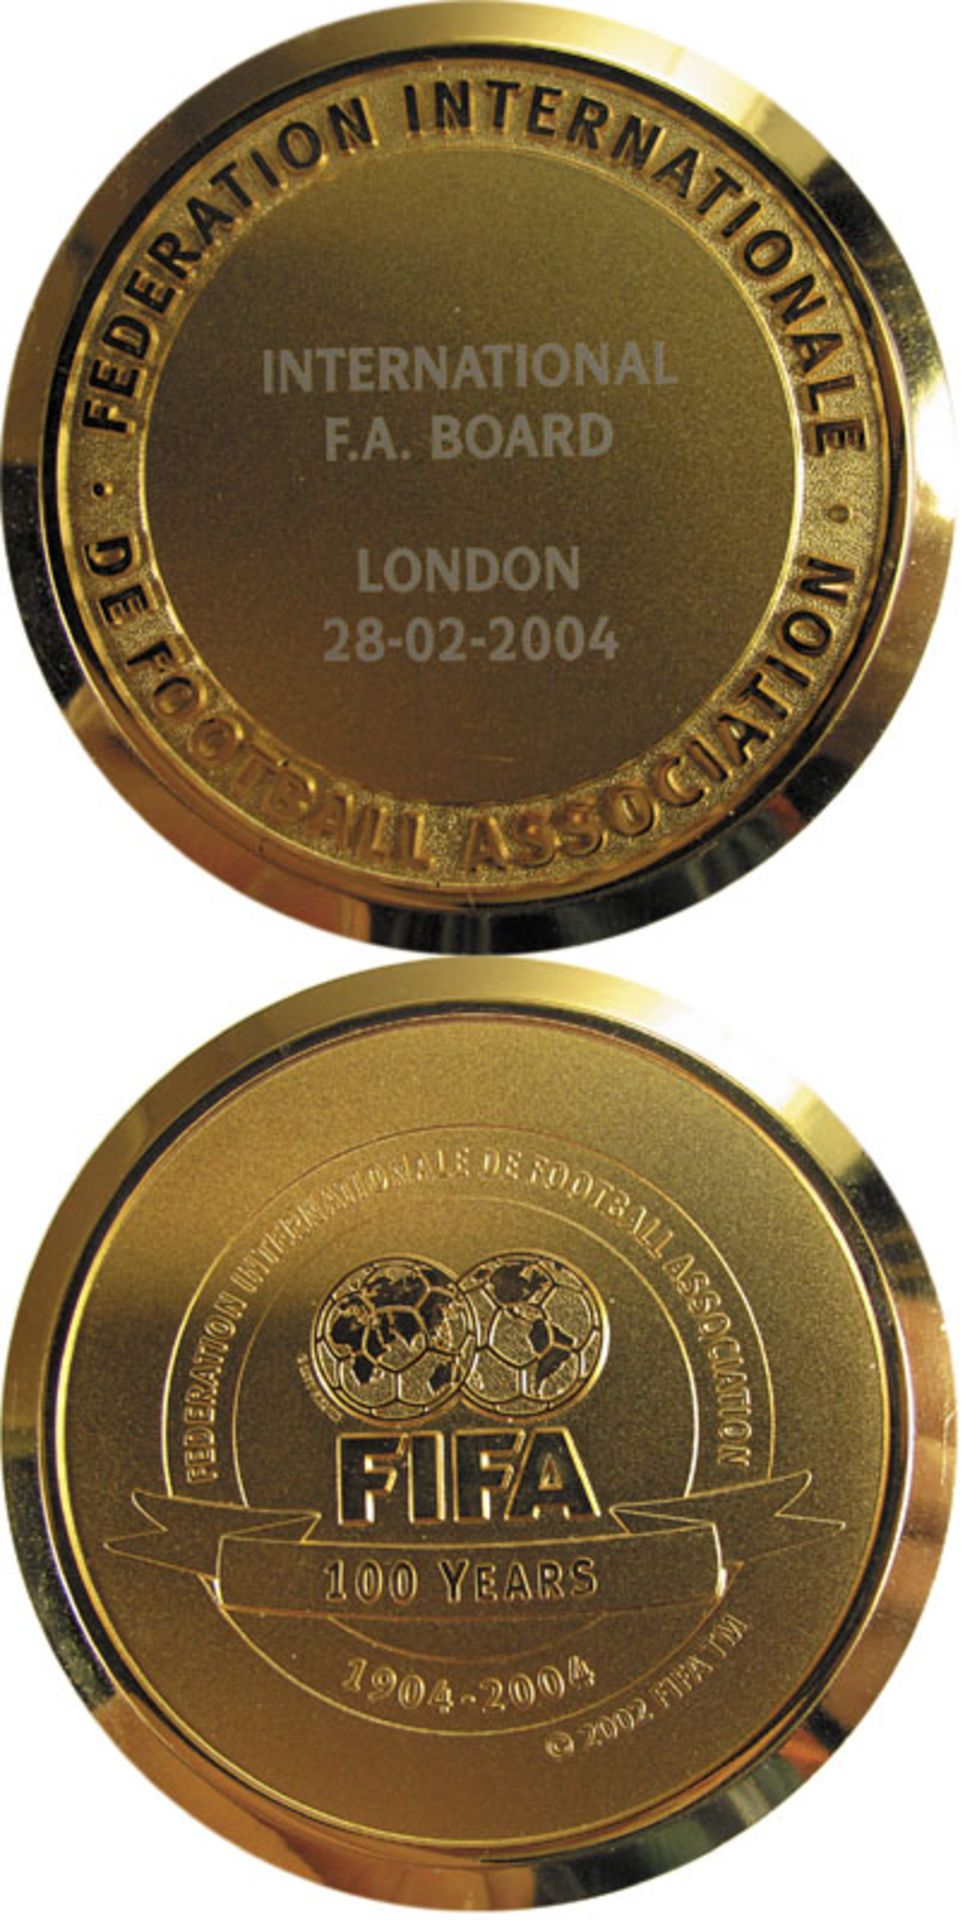 100 Years FIFA Official anniversary Medal - Large official anniverary medal on occasion of FIFA "100